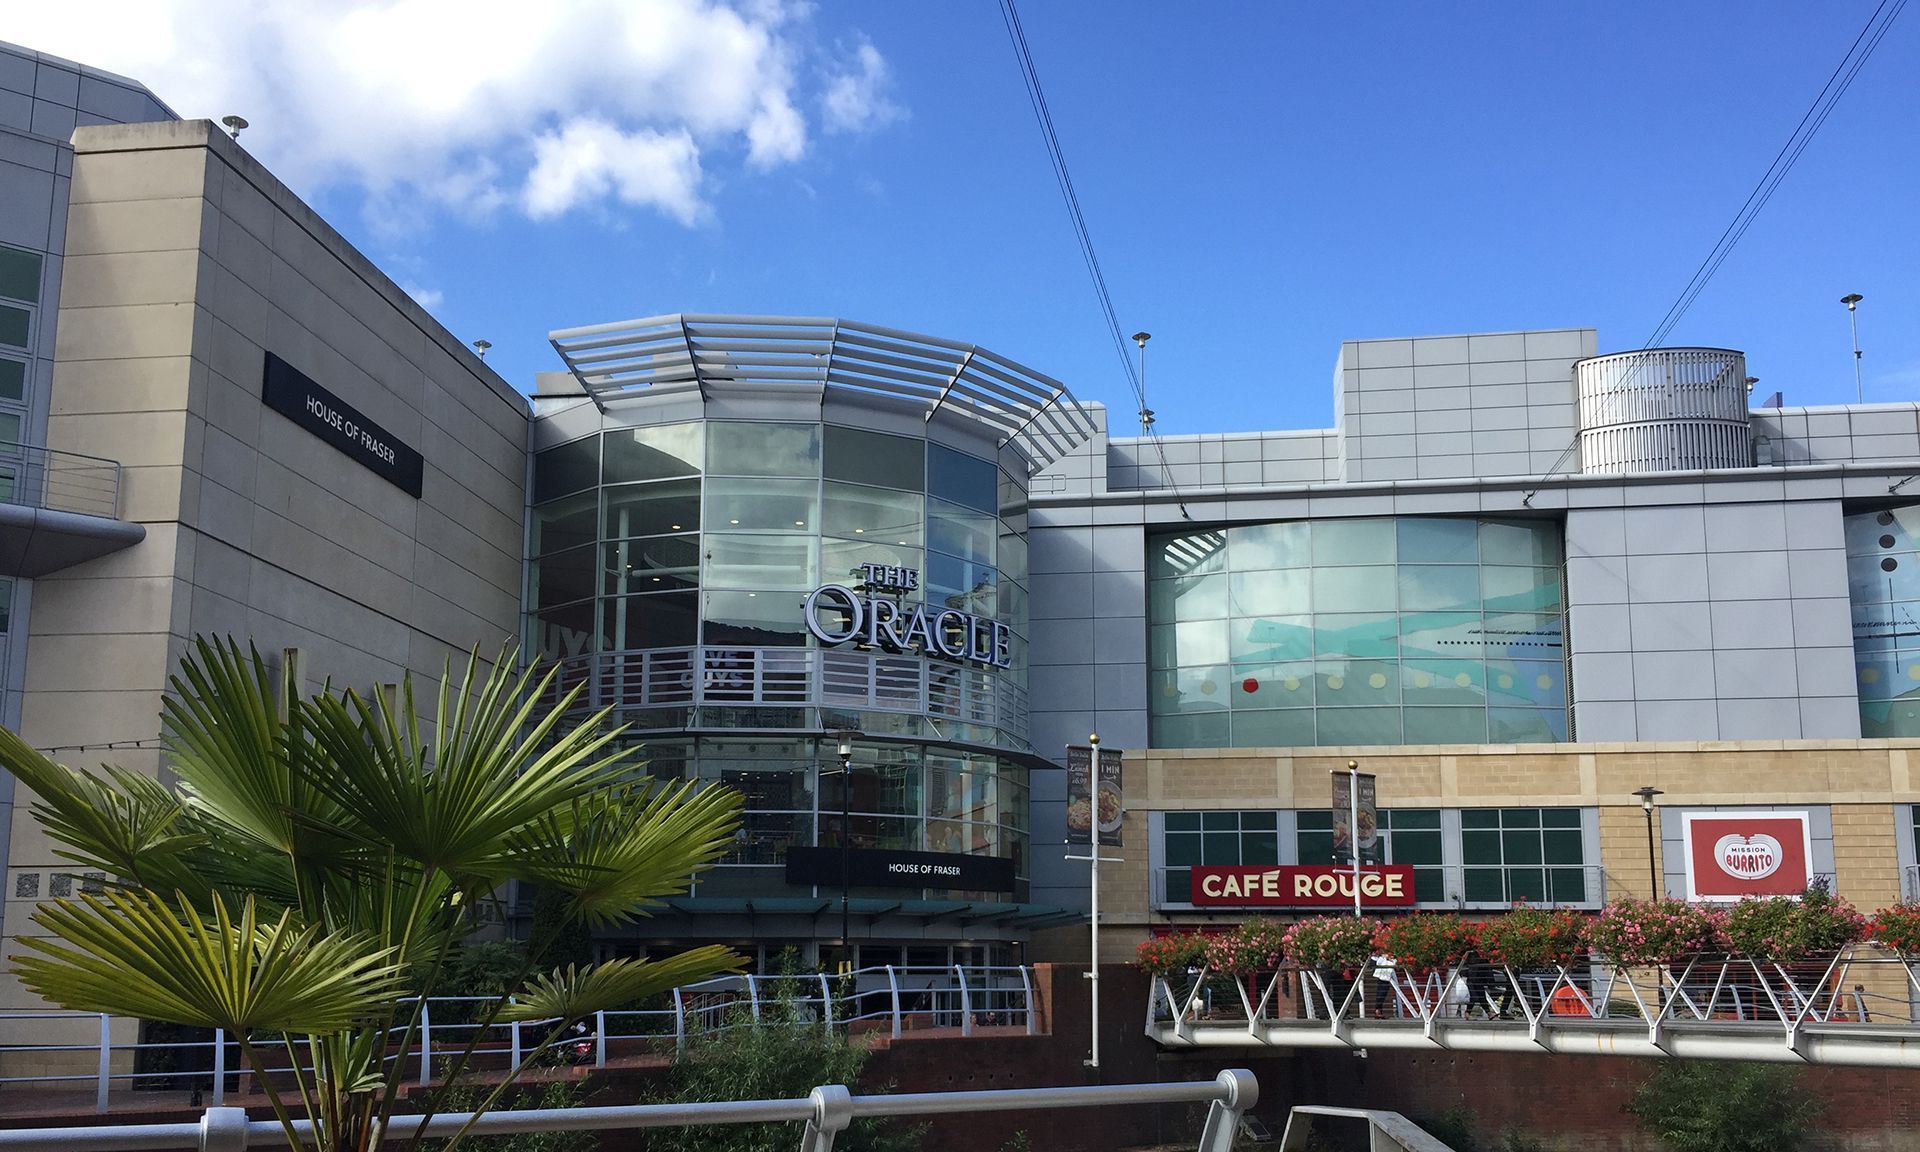 The oracle shopping centre